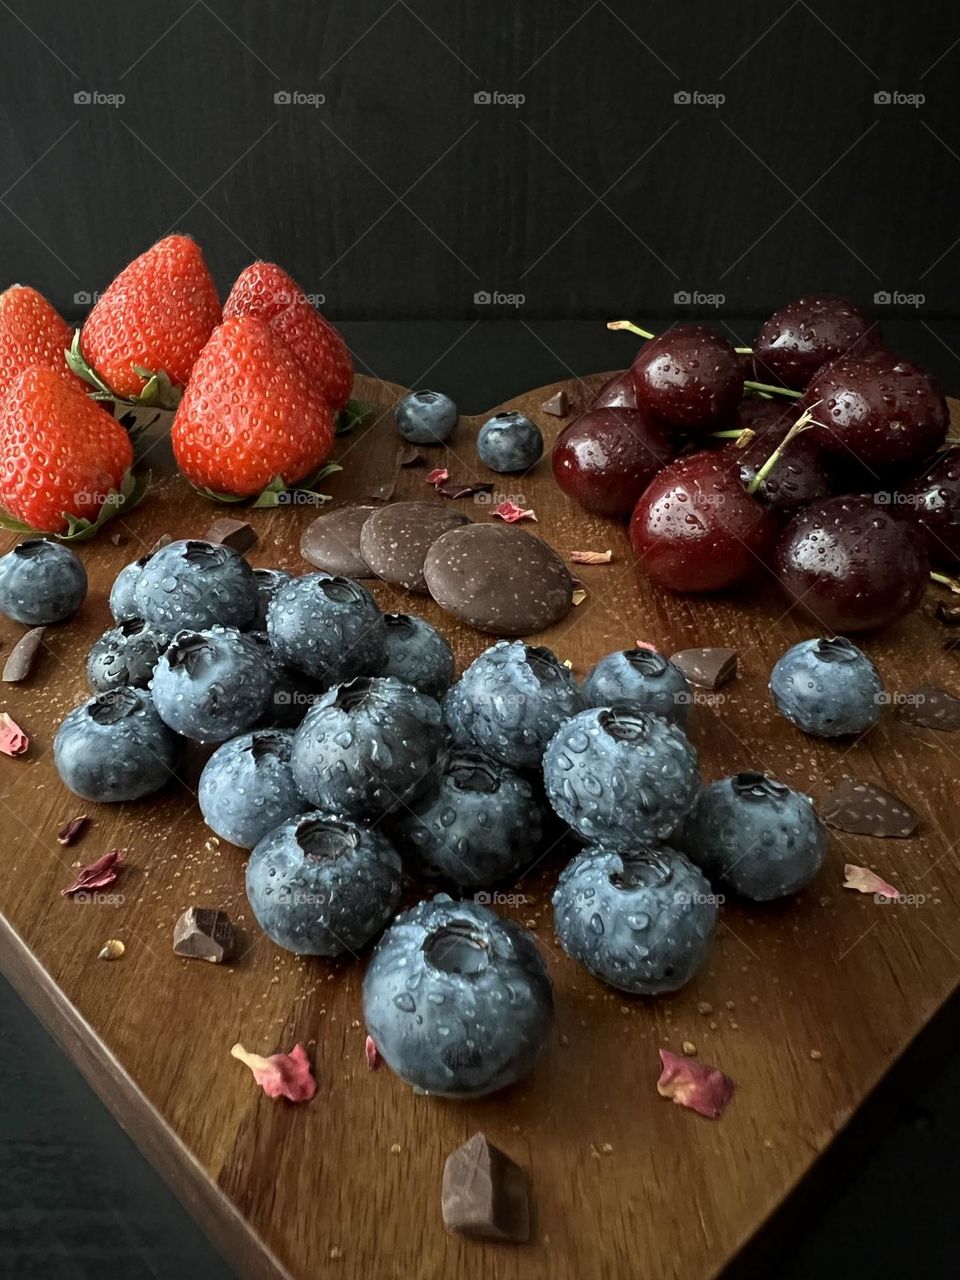 Tasty and delicious fresh berries. Blueberry, strawberry, cherry. Healthy snacks.